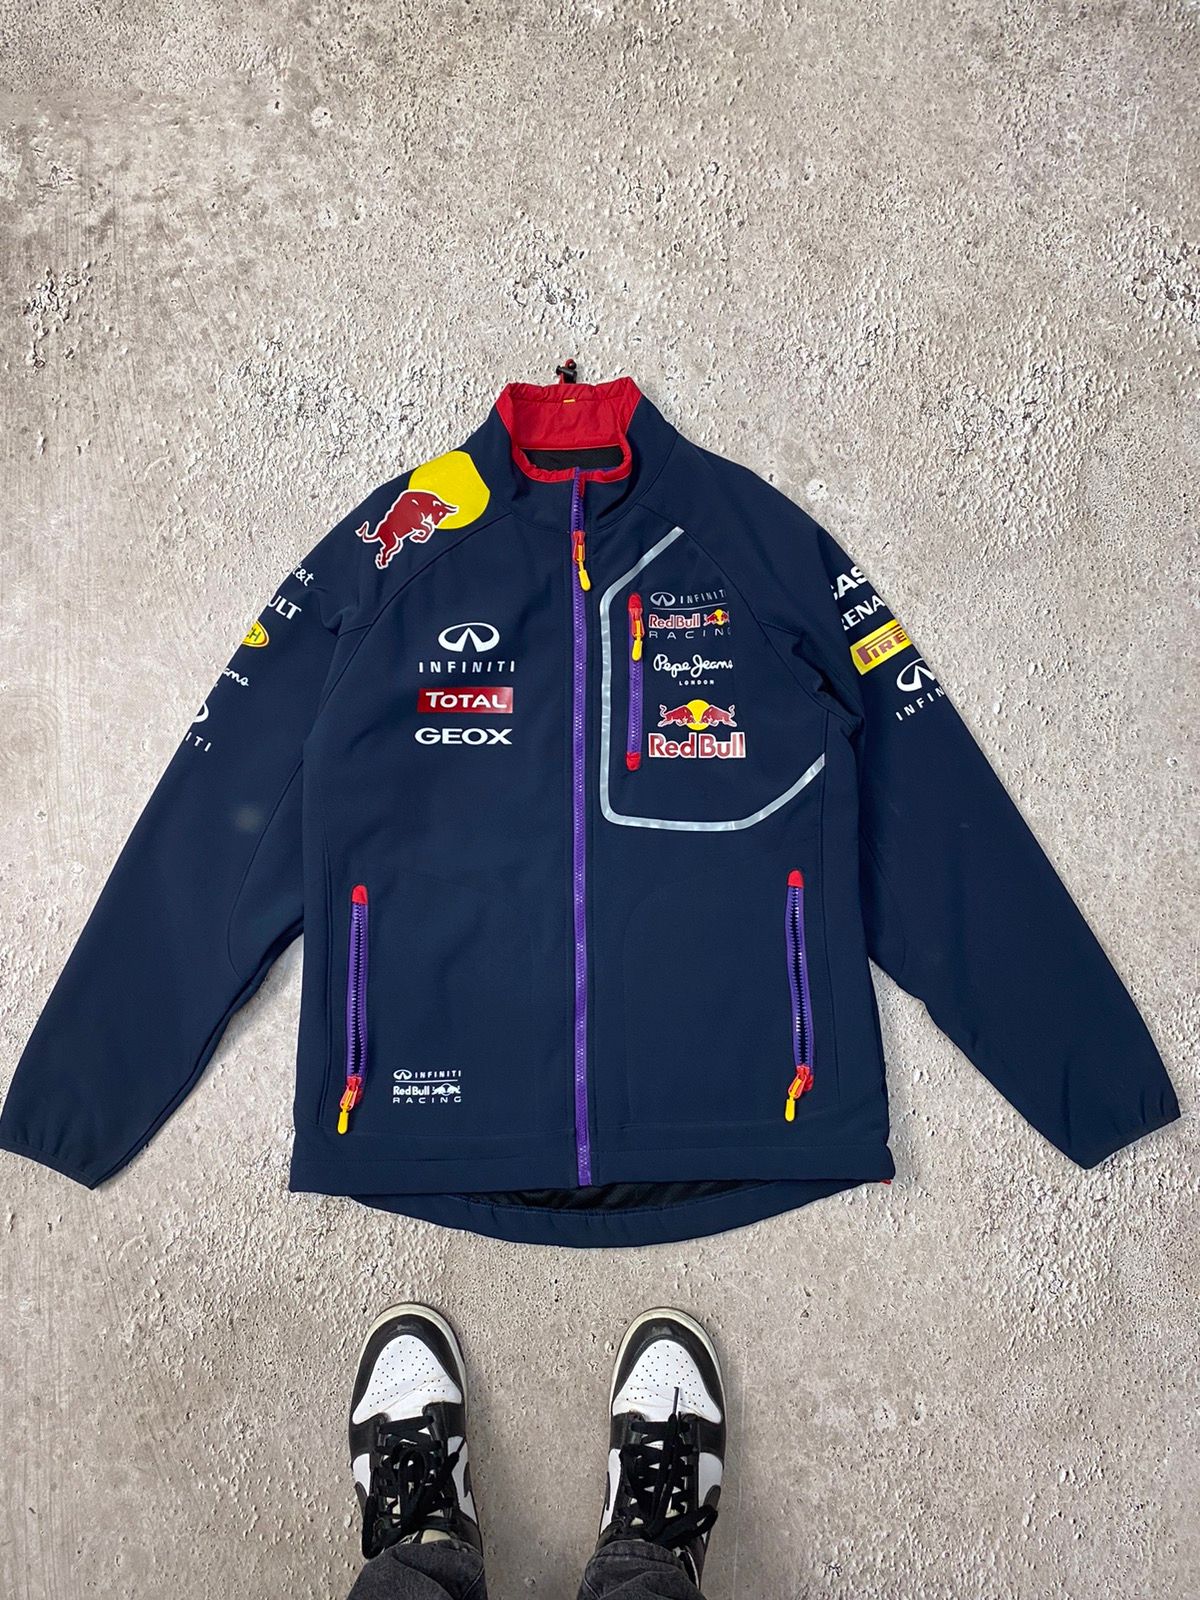 Pepe Jeans RARE😎😎red bull racing F1 Jacket softshell | Grailed